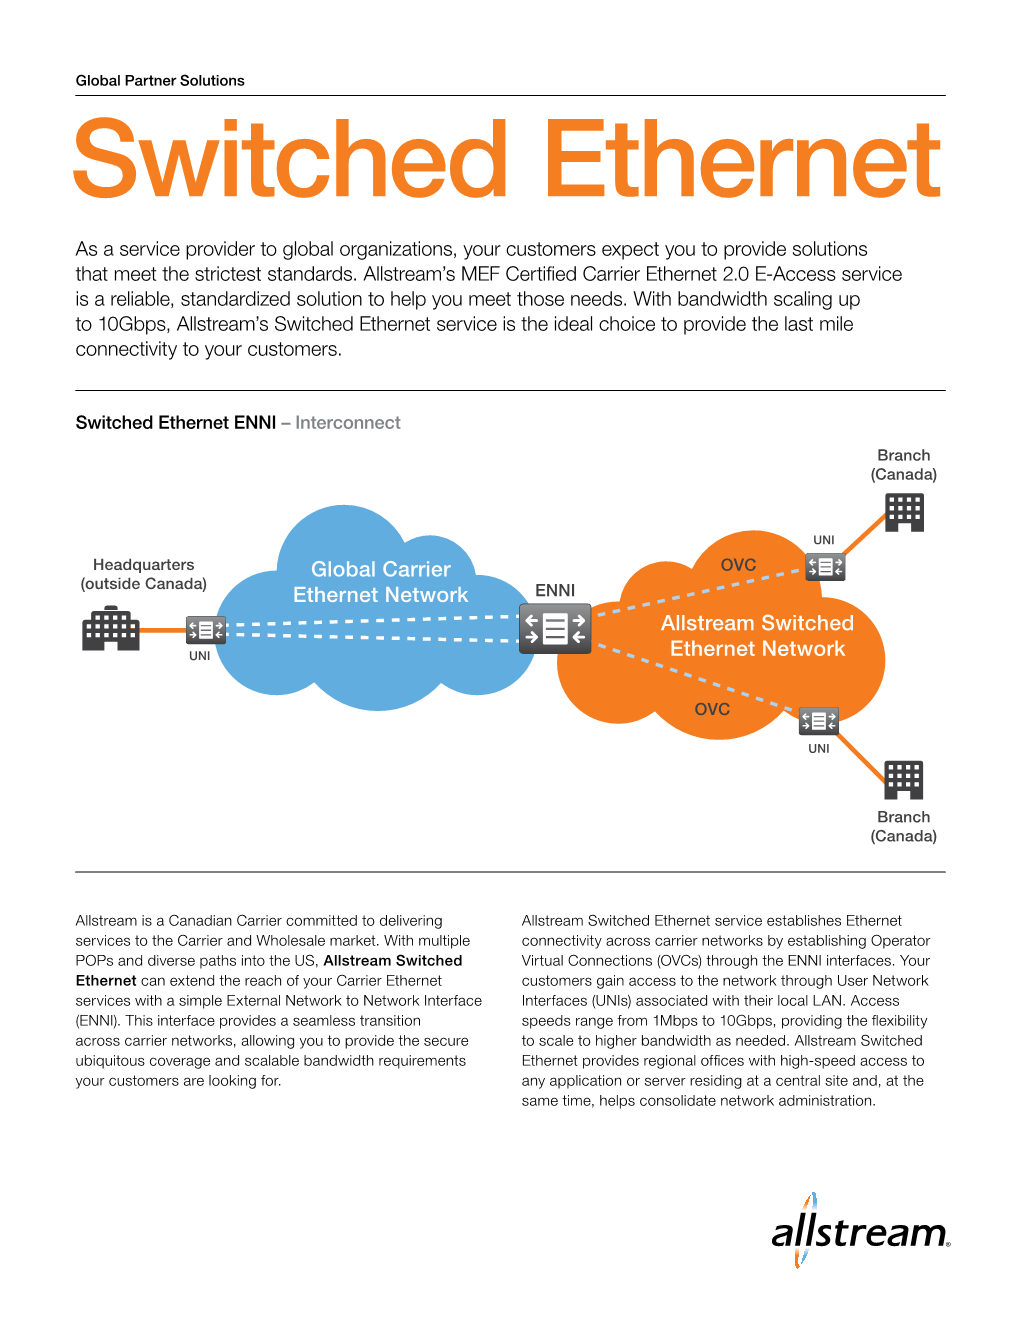 Switched Ethernet As a Service Provider to Global Organizations, Your Customers Expect You to Provide Solutions That Meet the Strictest Standards